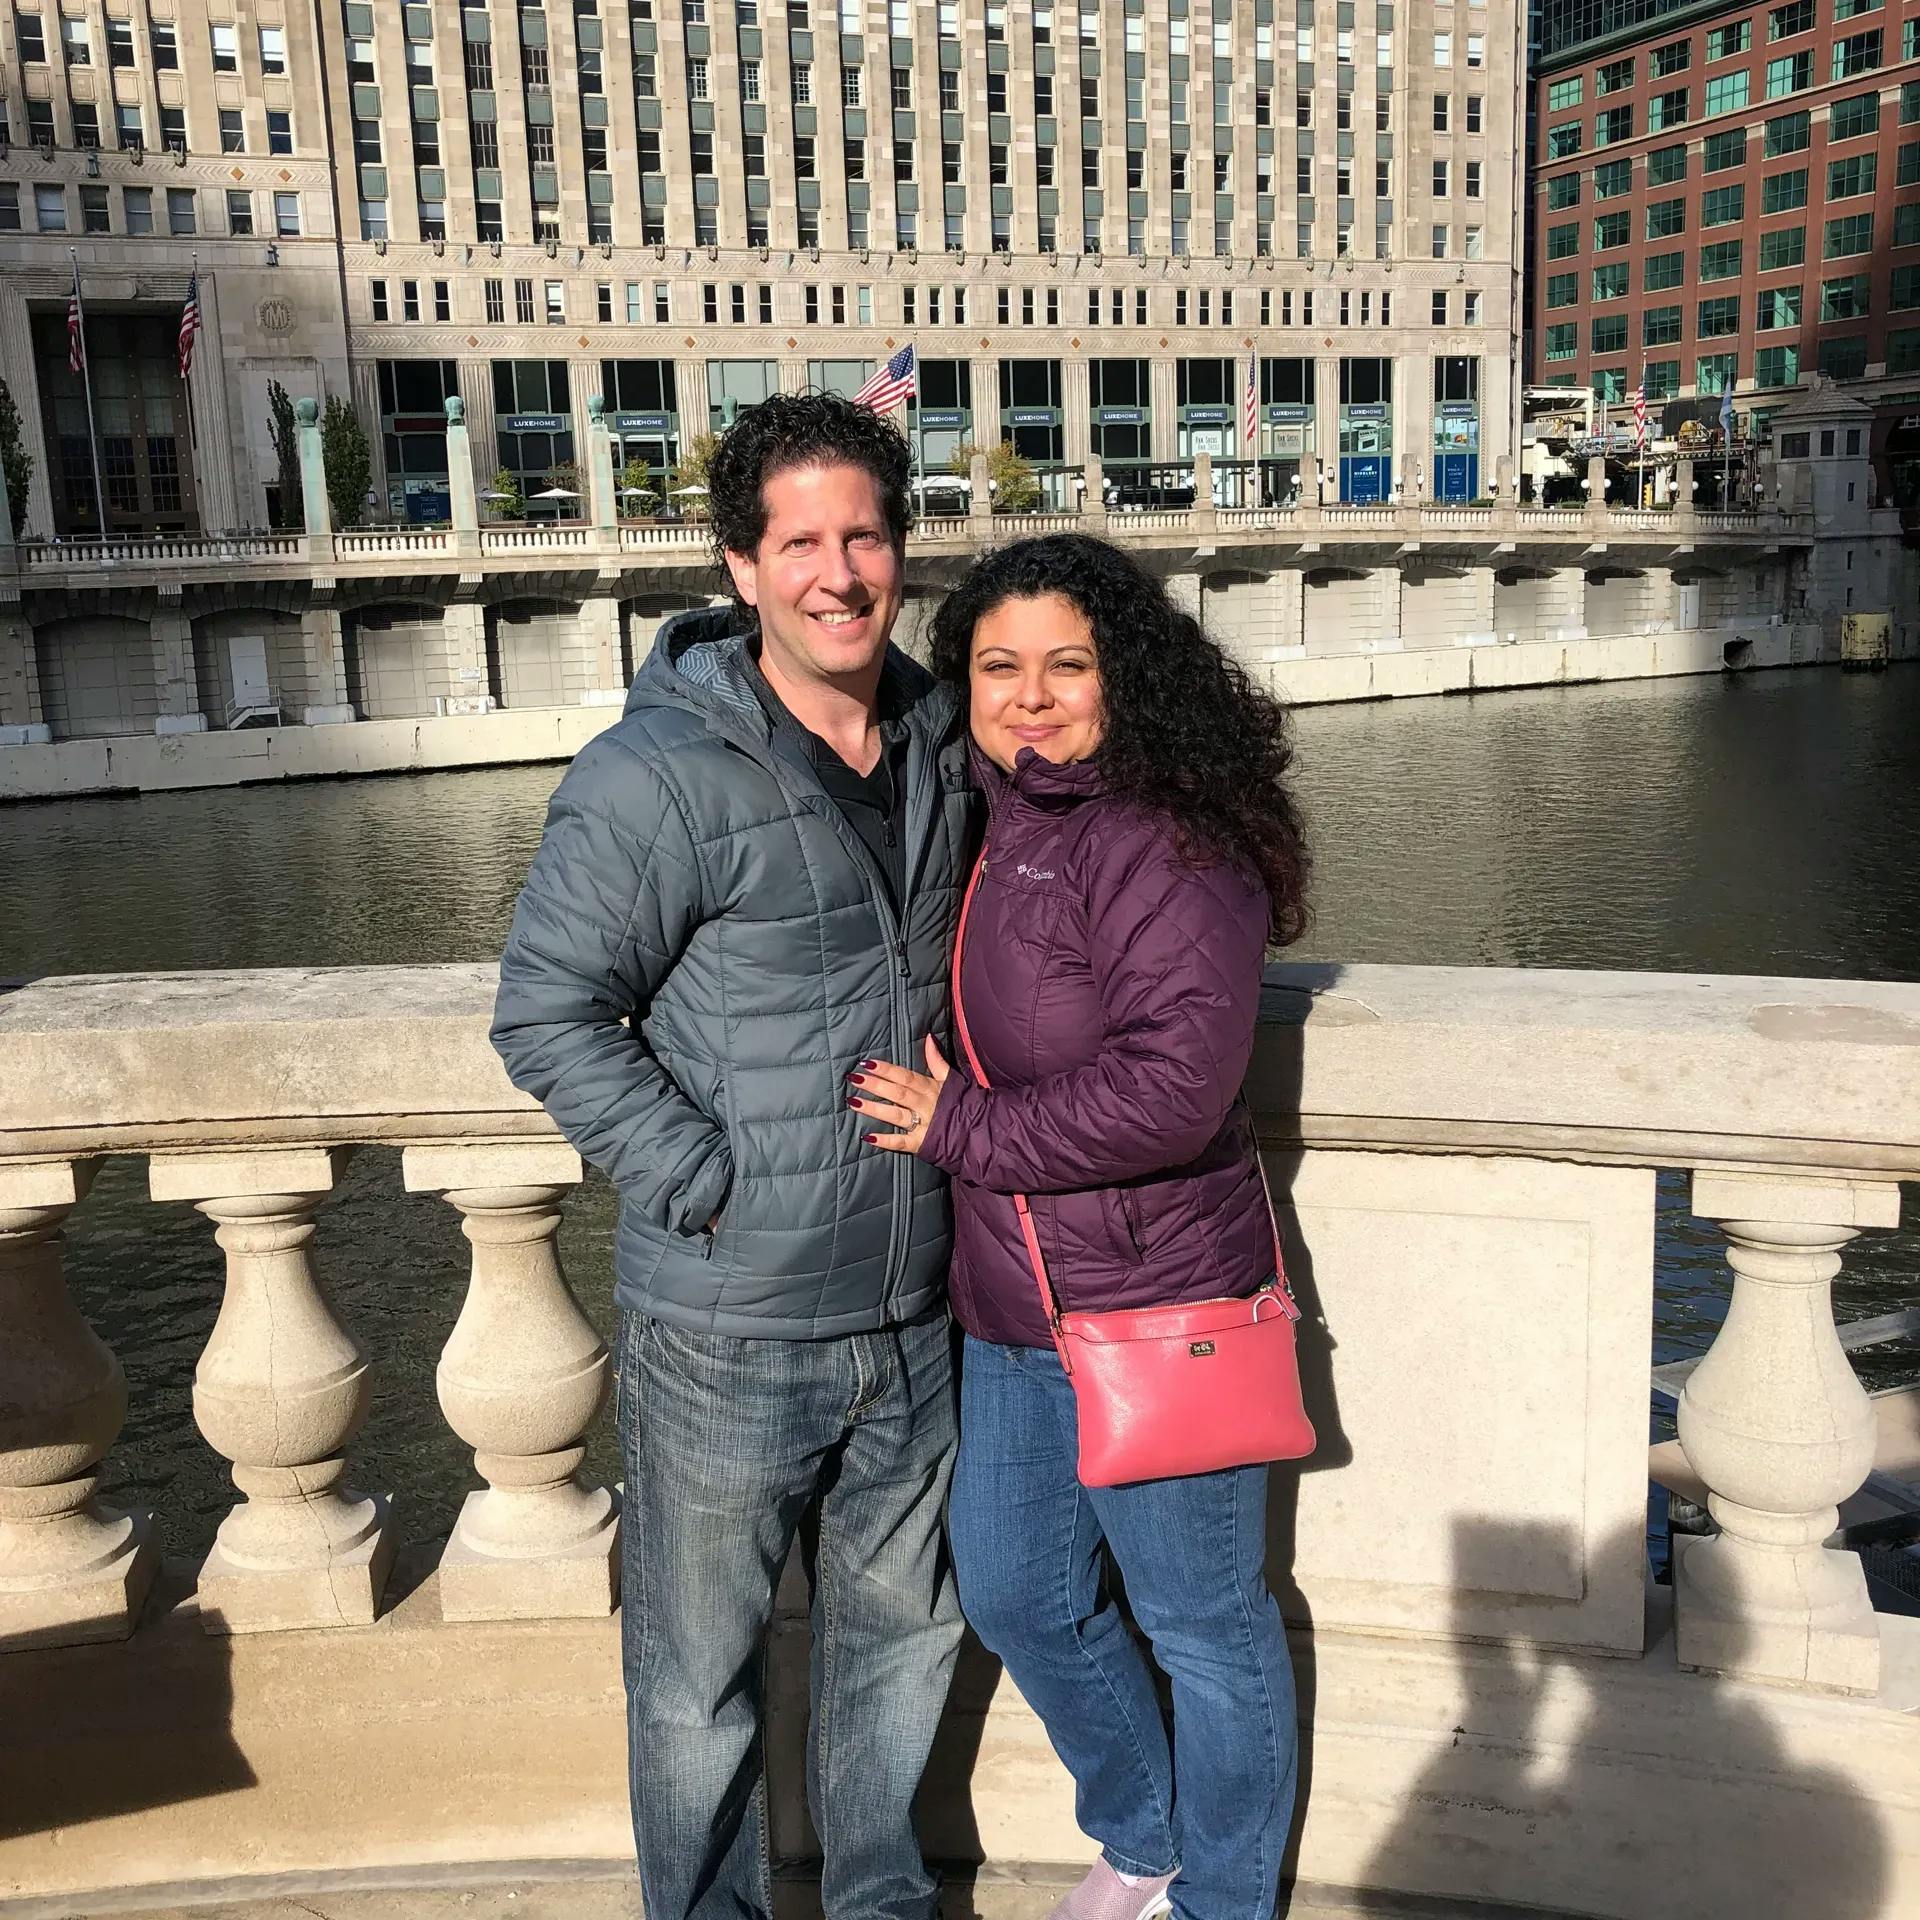 Enjoying some site seeing at downtown Chicago by the river in October